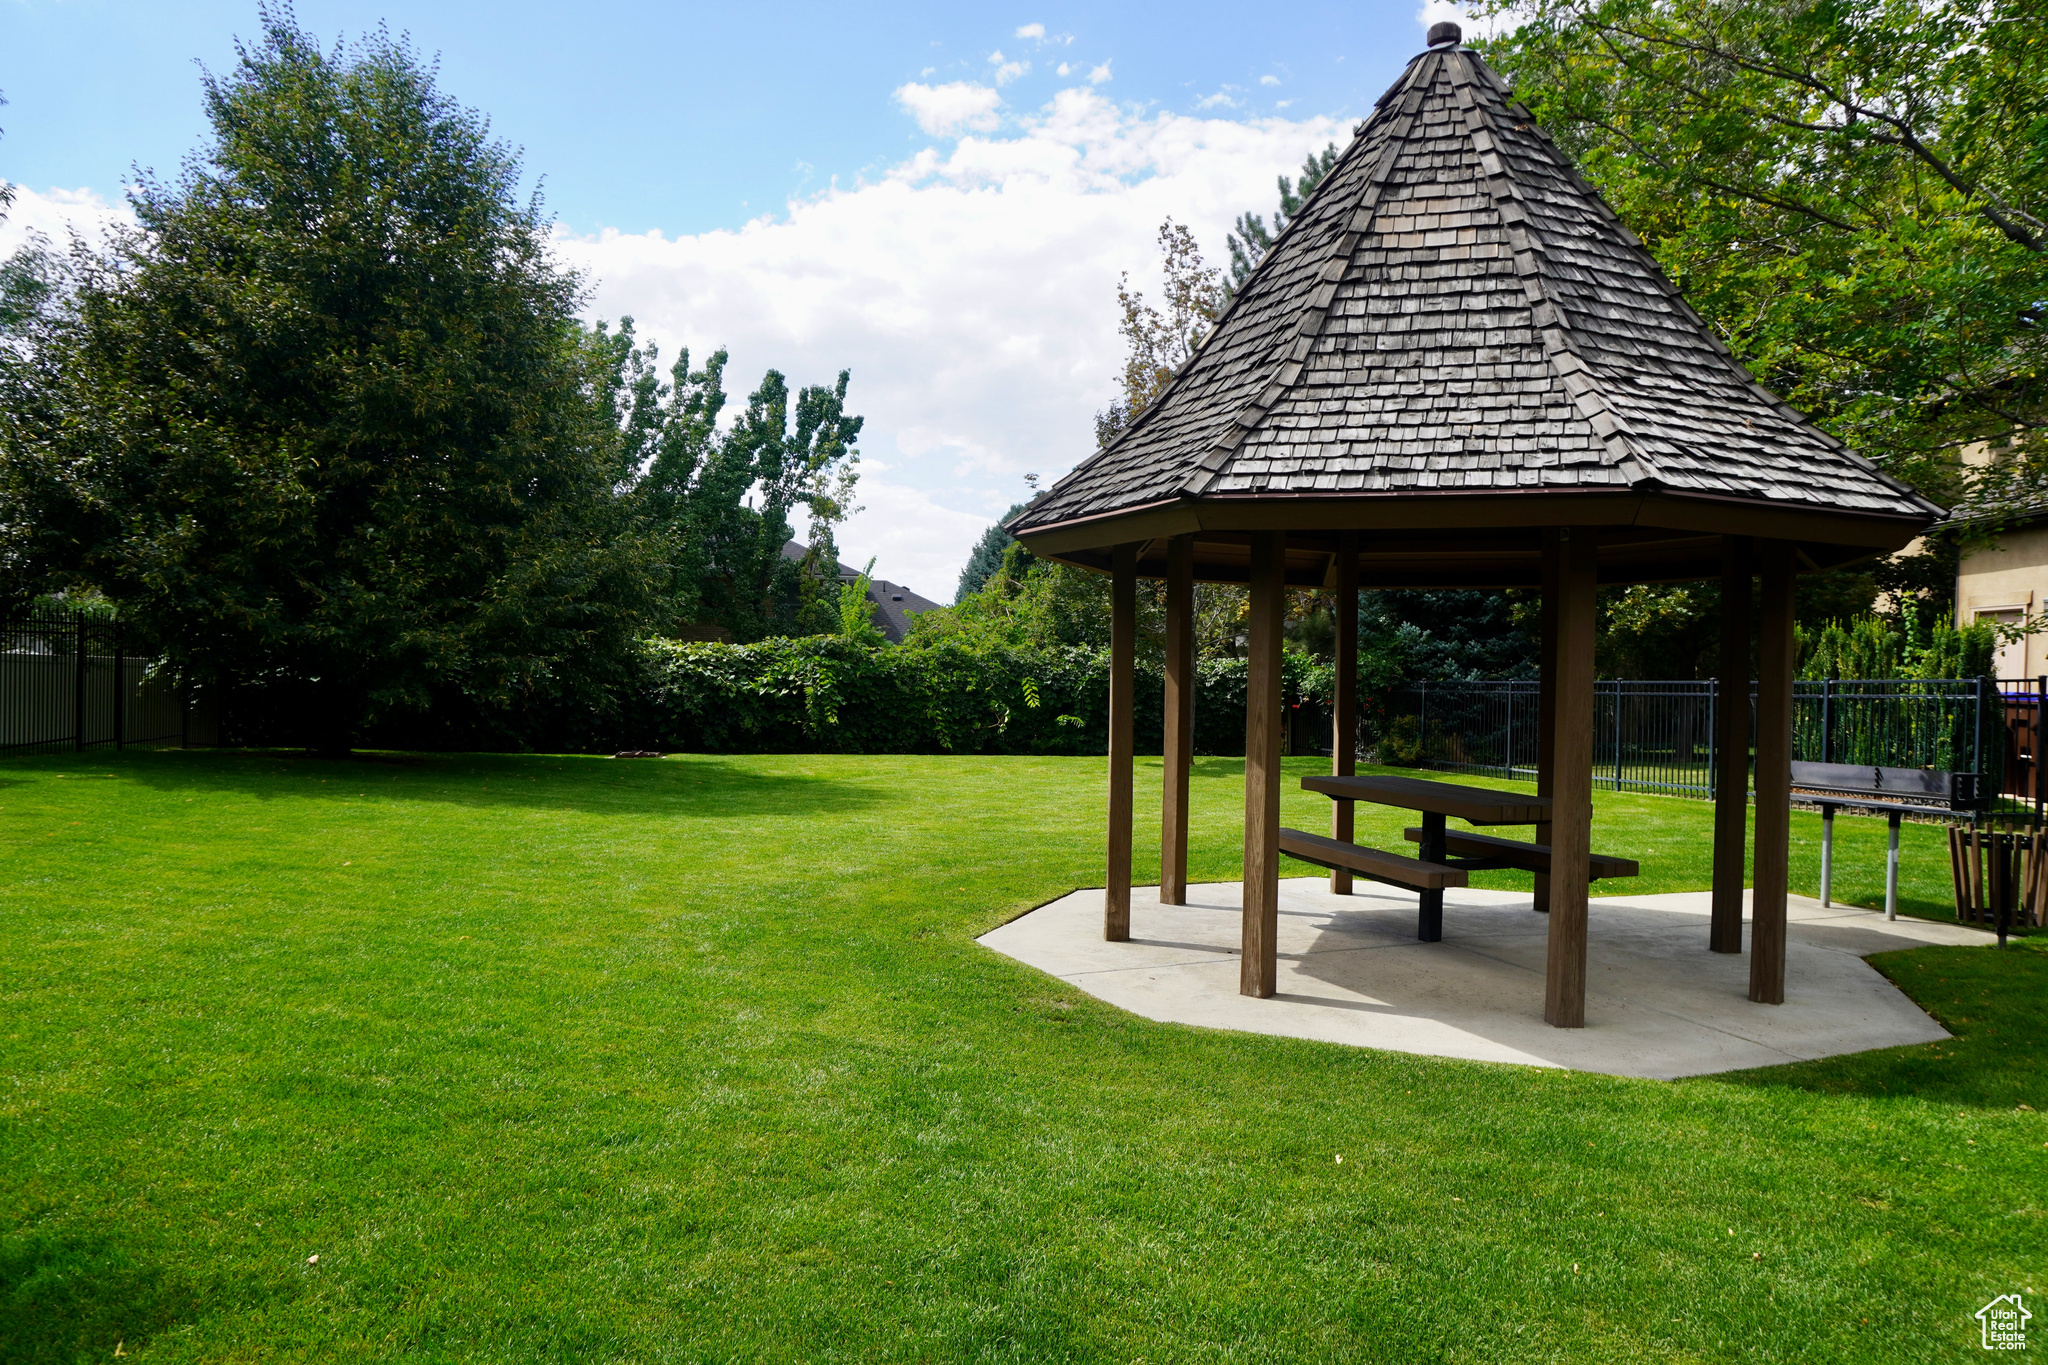 View of park within the gated community with a gazebo and a lawn